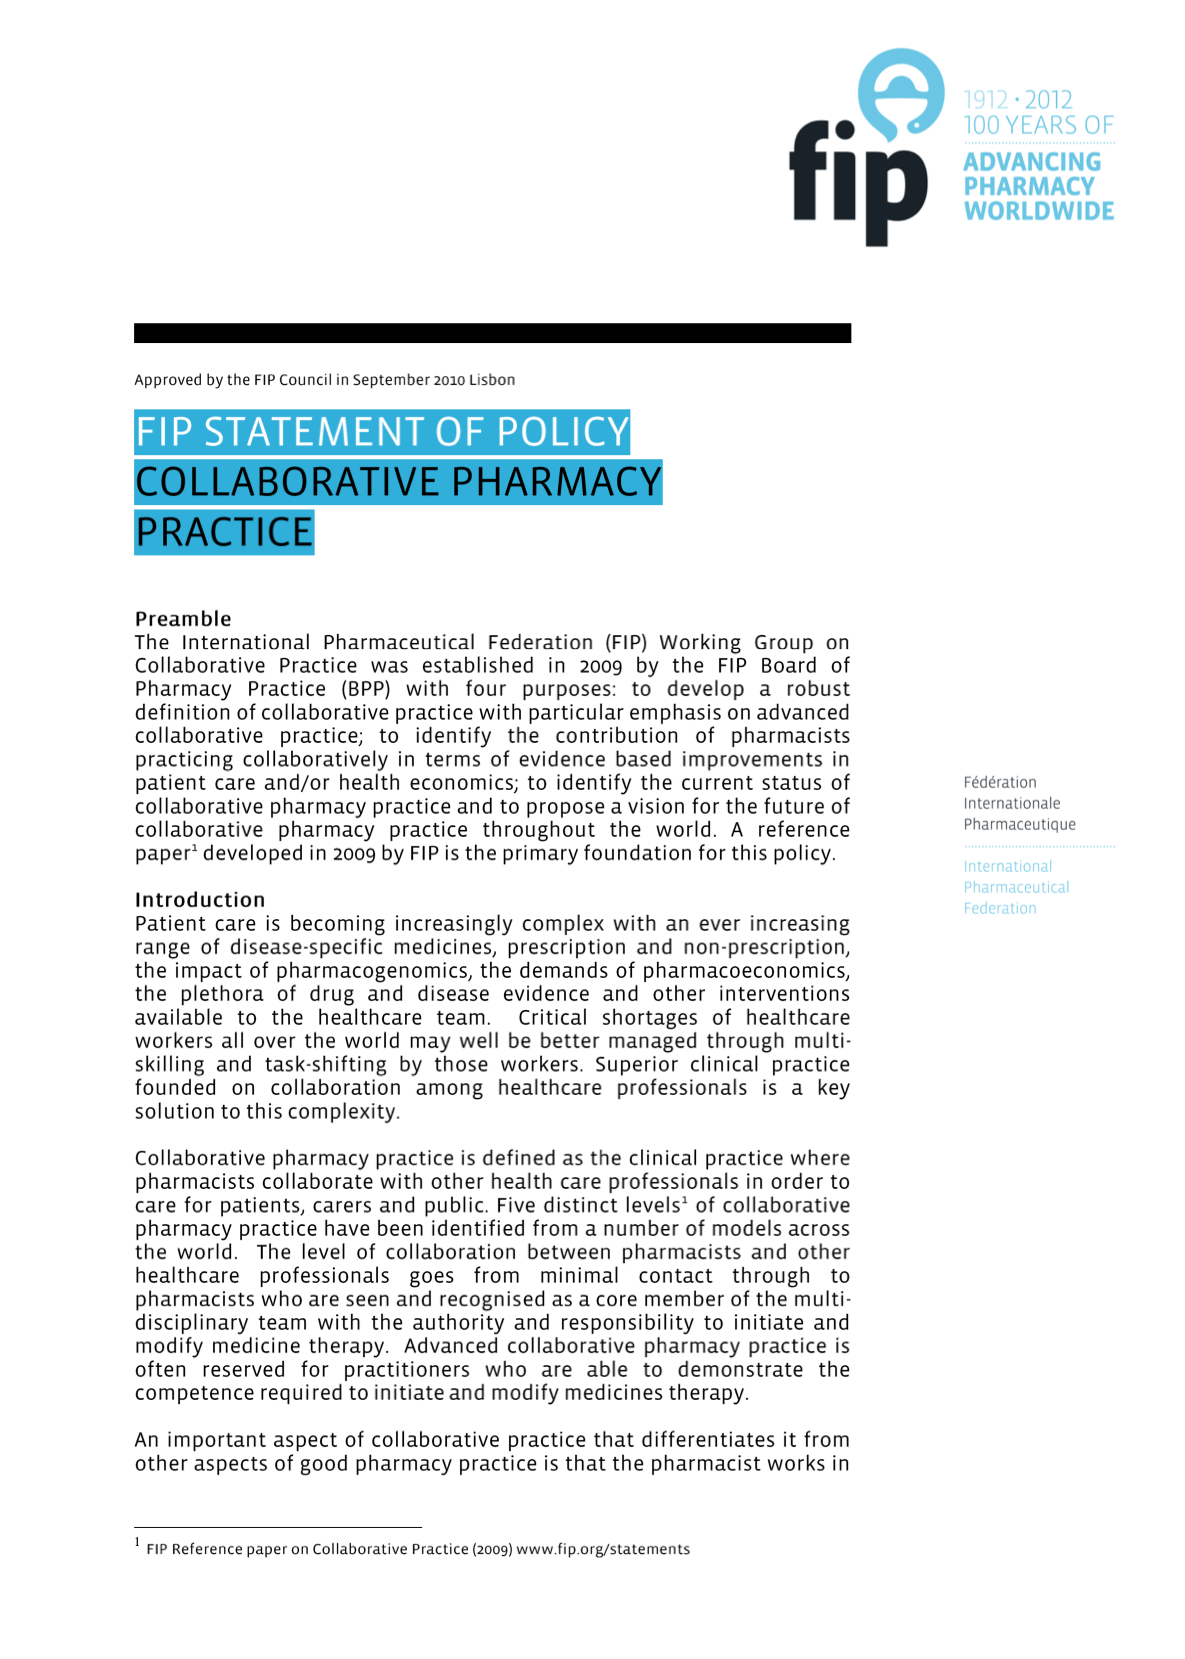 FIP Statement of Policy Collaborative Pharmacy Practice (2010) Thumbnail